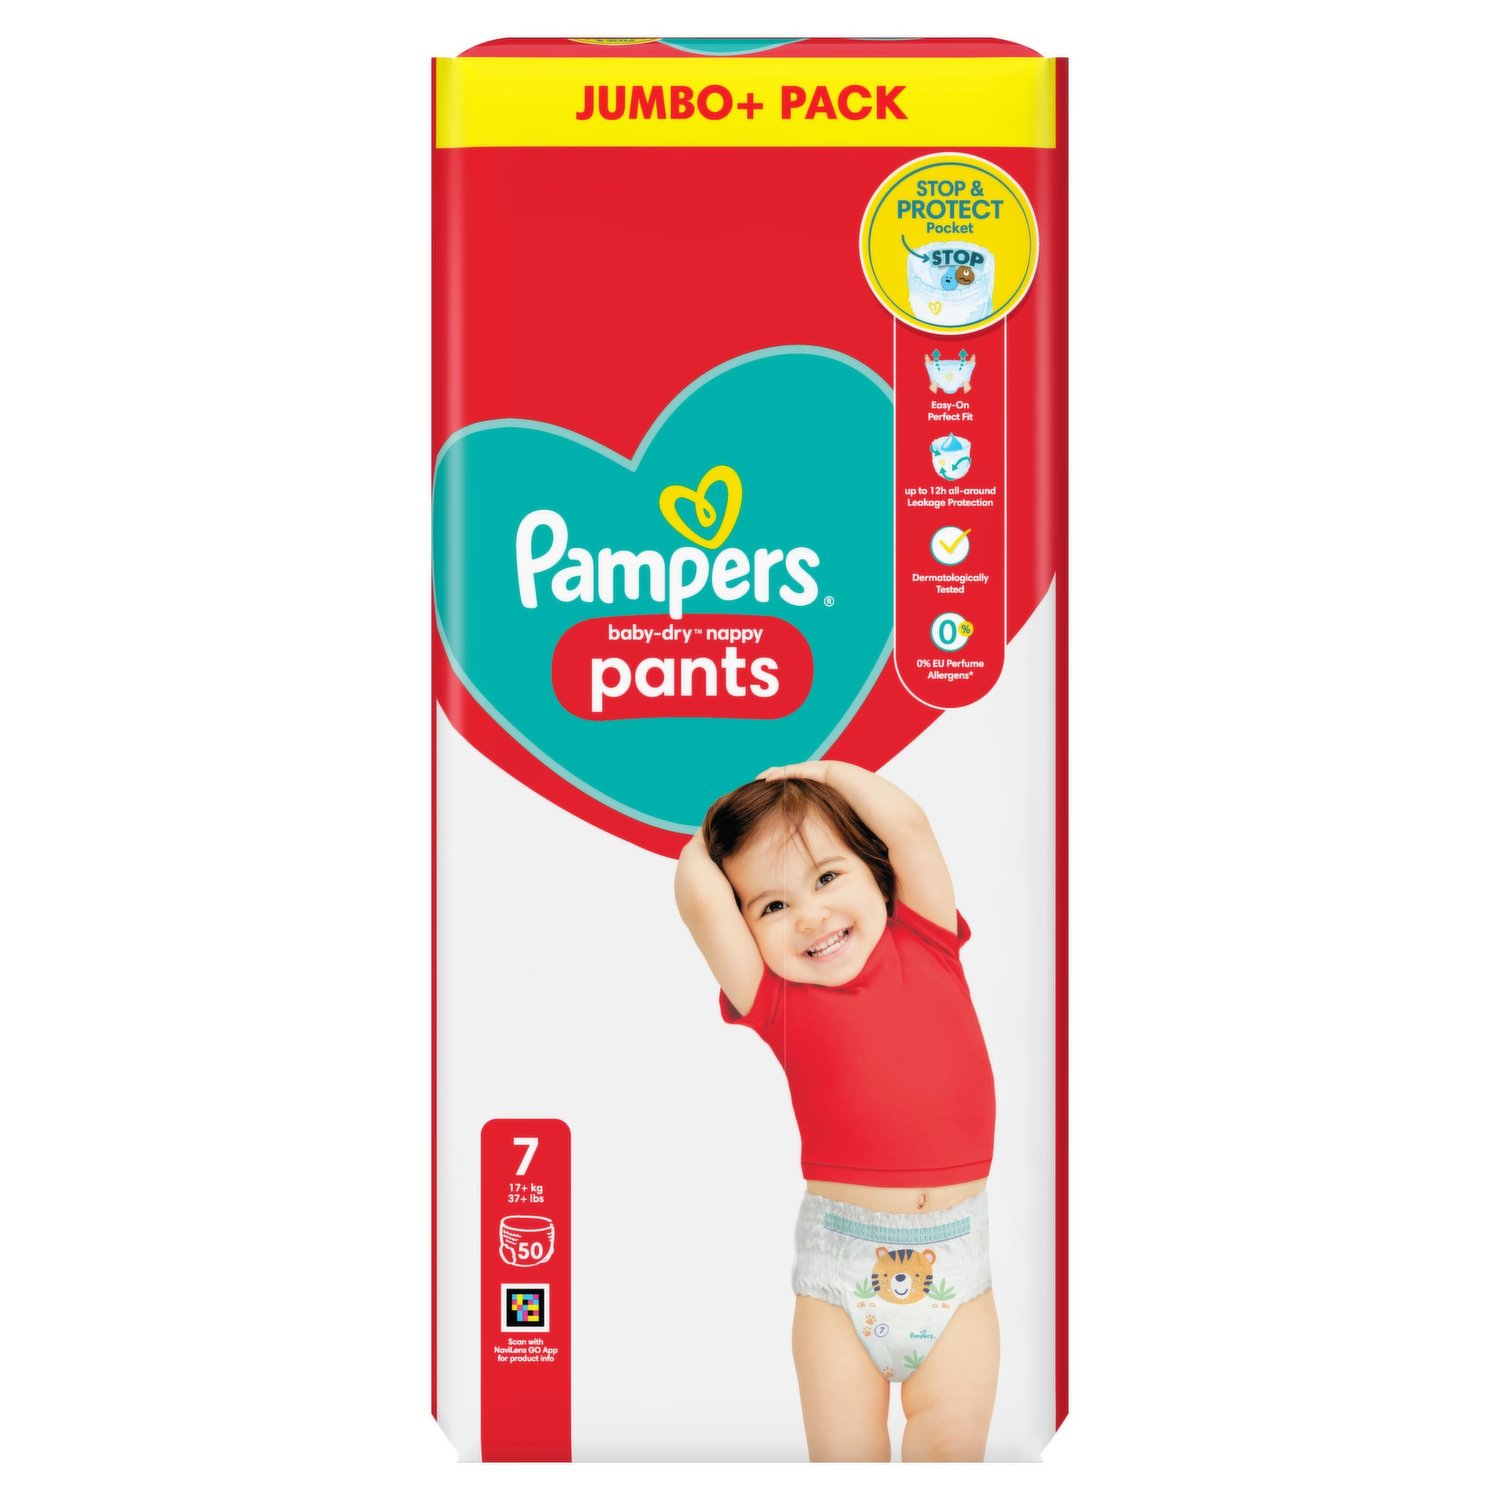 Pampers Baby-Dry Nappy Pants Size 7, 25 Nappies, 17kg+, Essential Pack